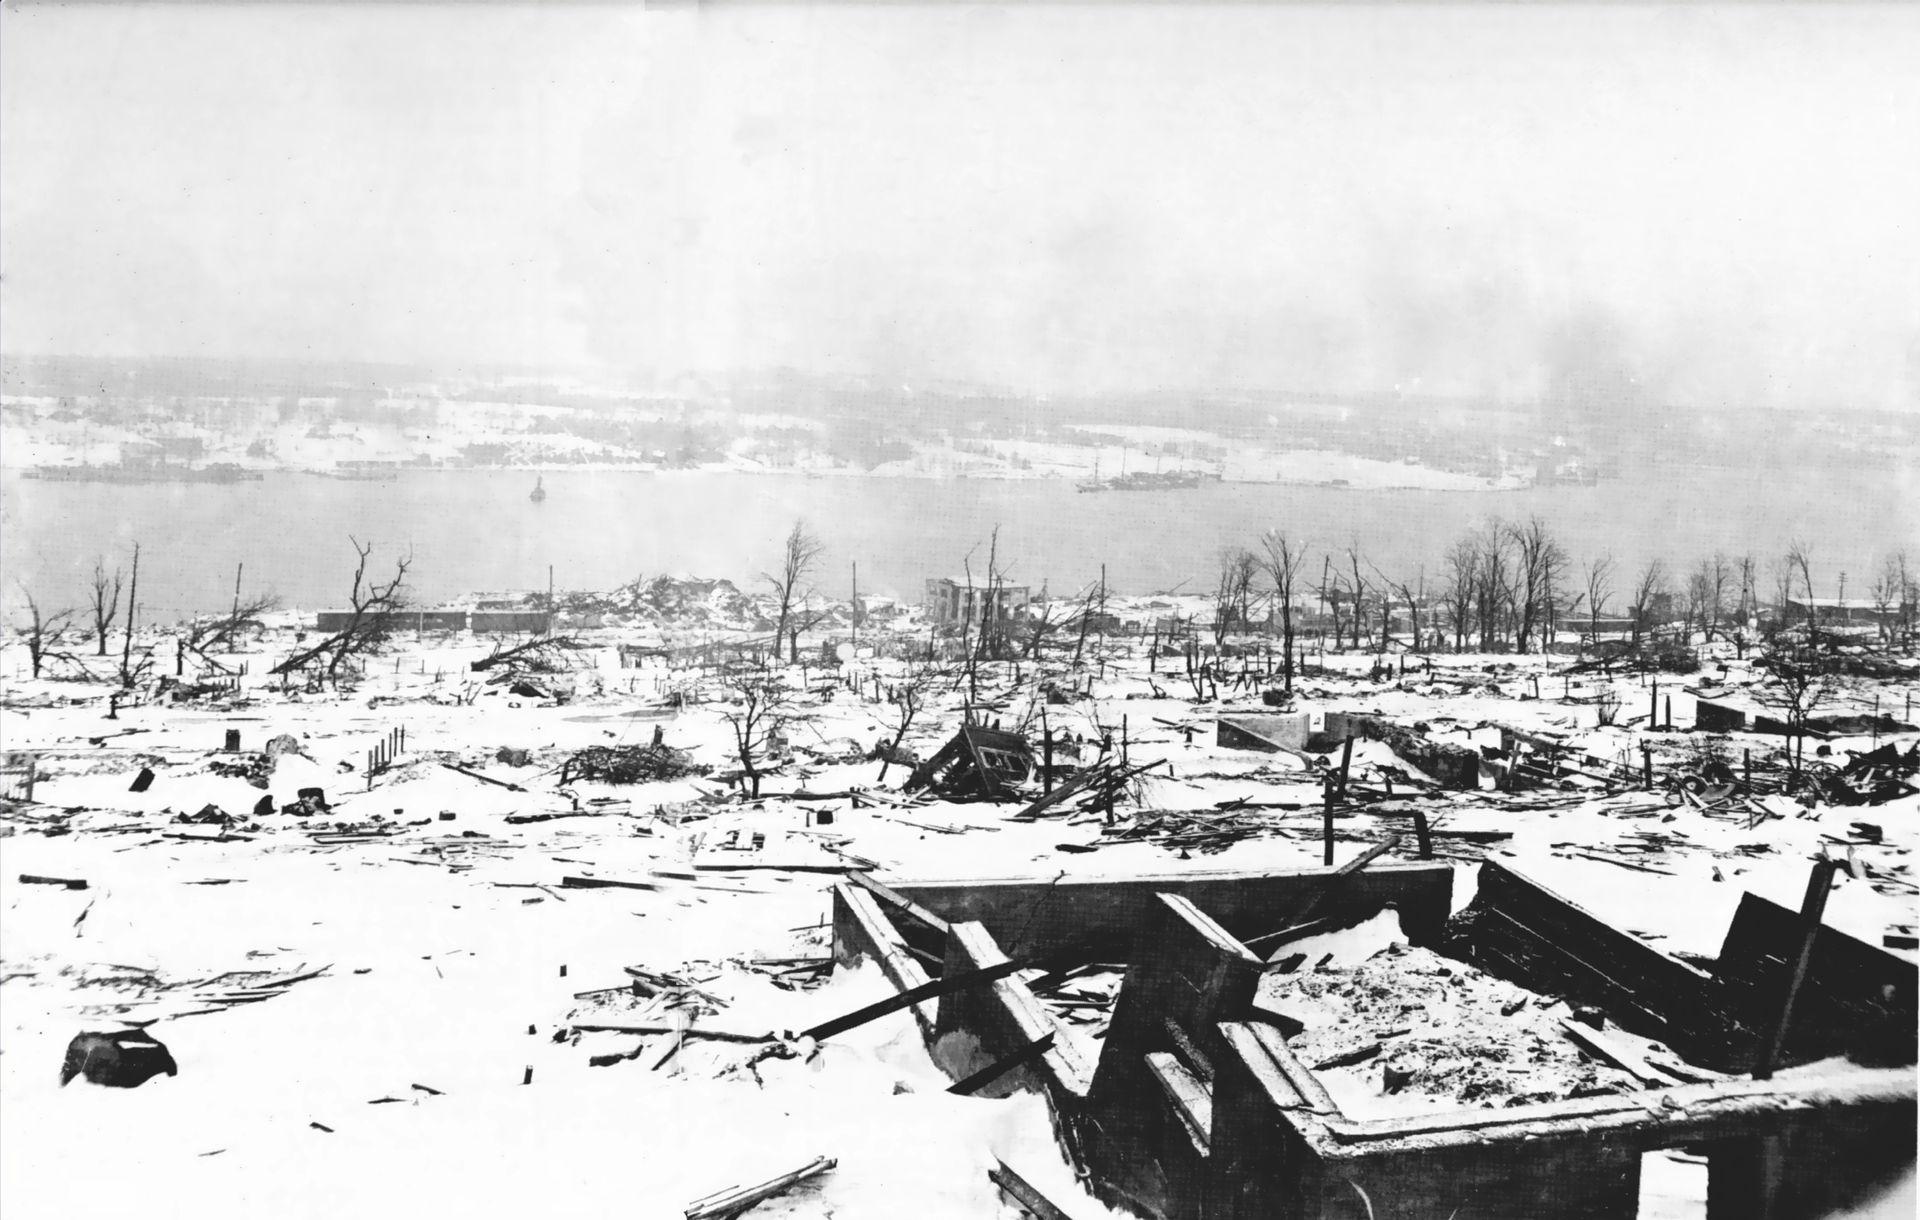 A view across the devastated city of Halifax, Nova Scotia after the Halifax Explosion, looking toward the harbor.